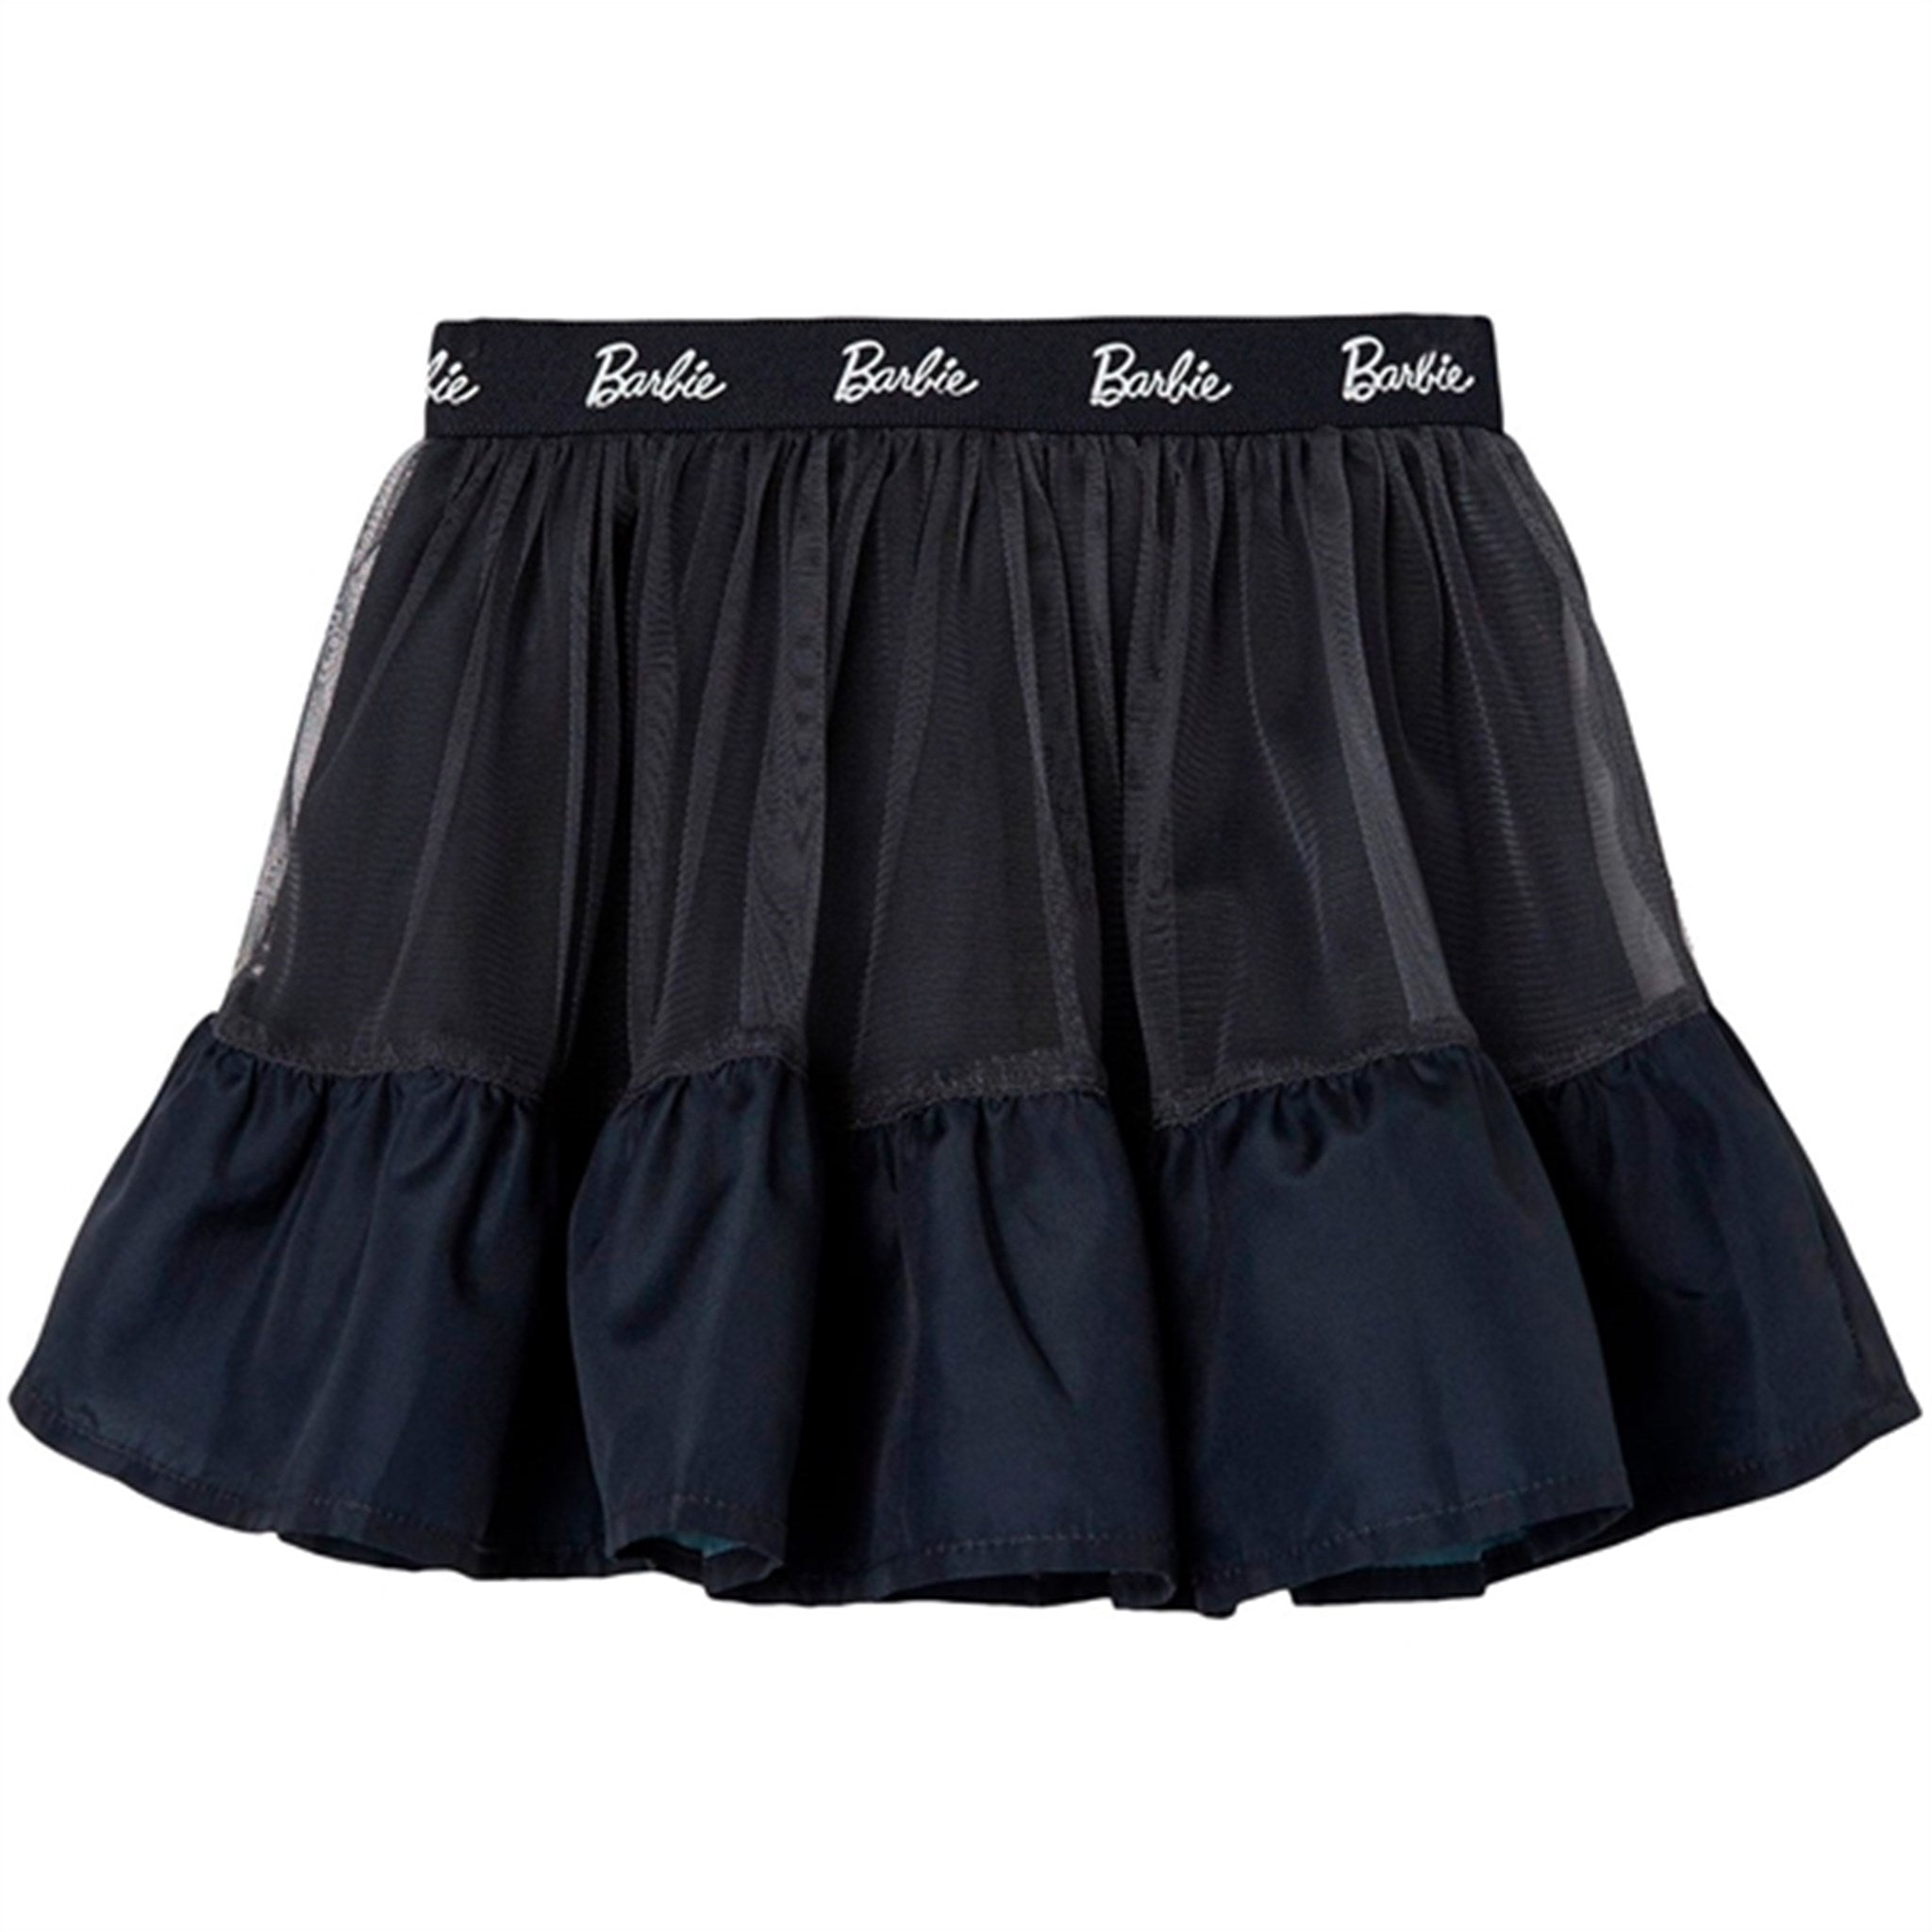 Name it India Ink Ally Barbie Tulle Skirt